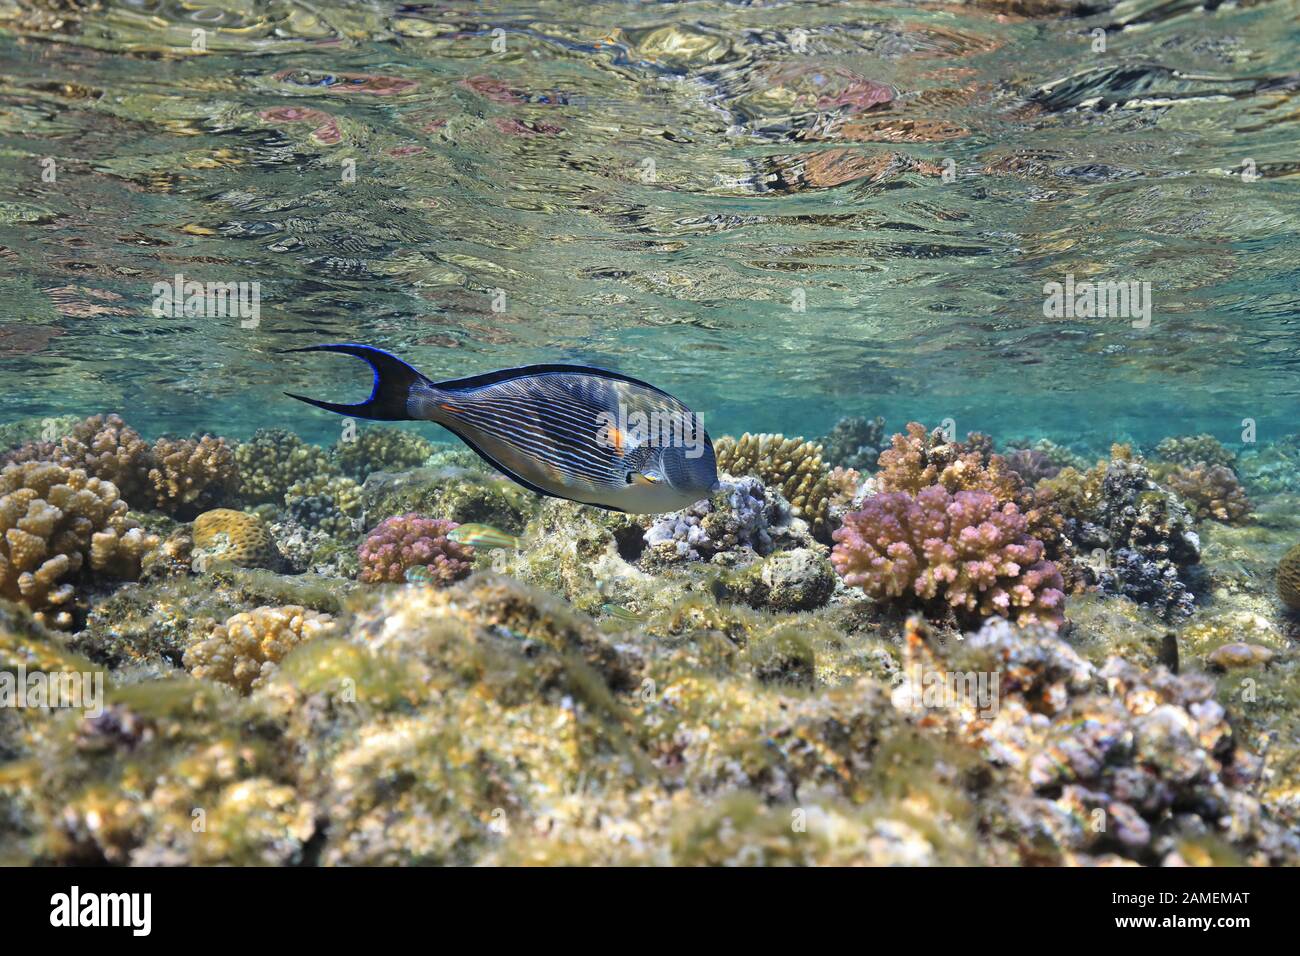 Sohal surgeonfish (Acanthurus sohal) underwater in the tropical coral reef of the Red Sea Stock Photo